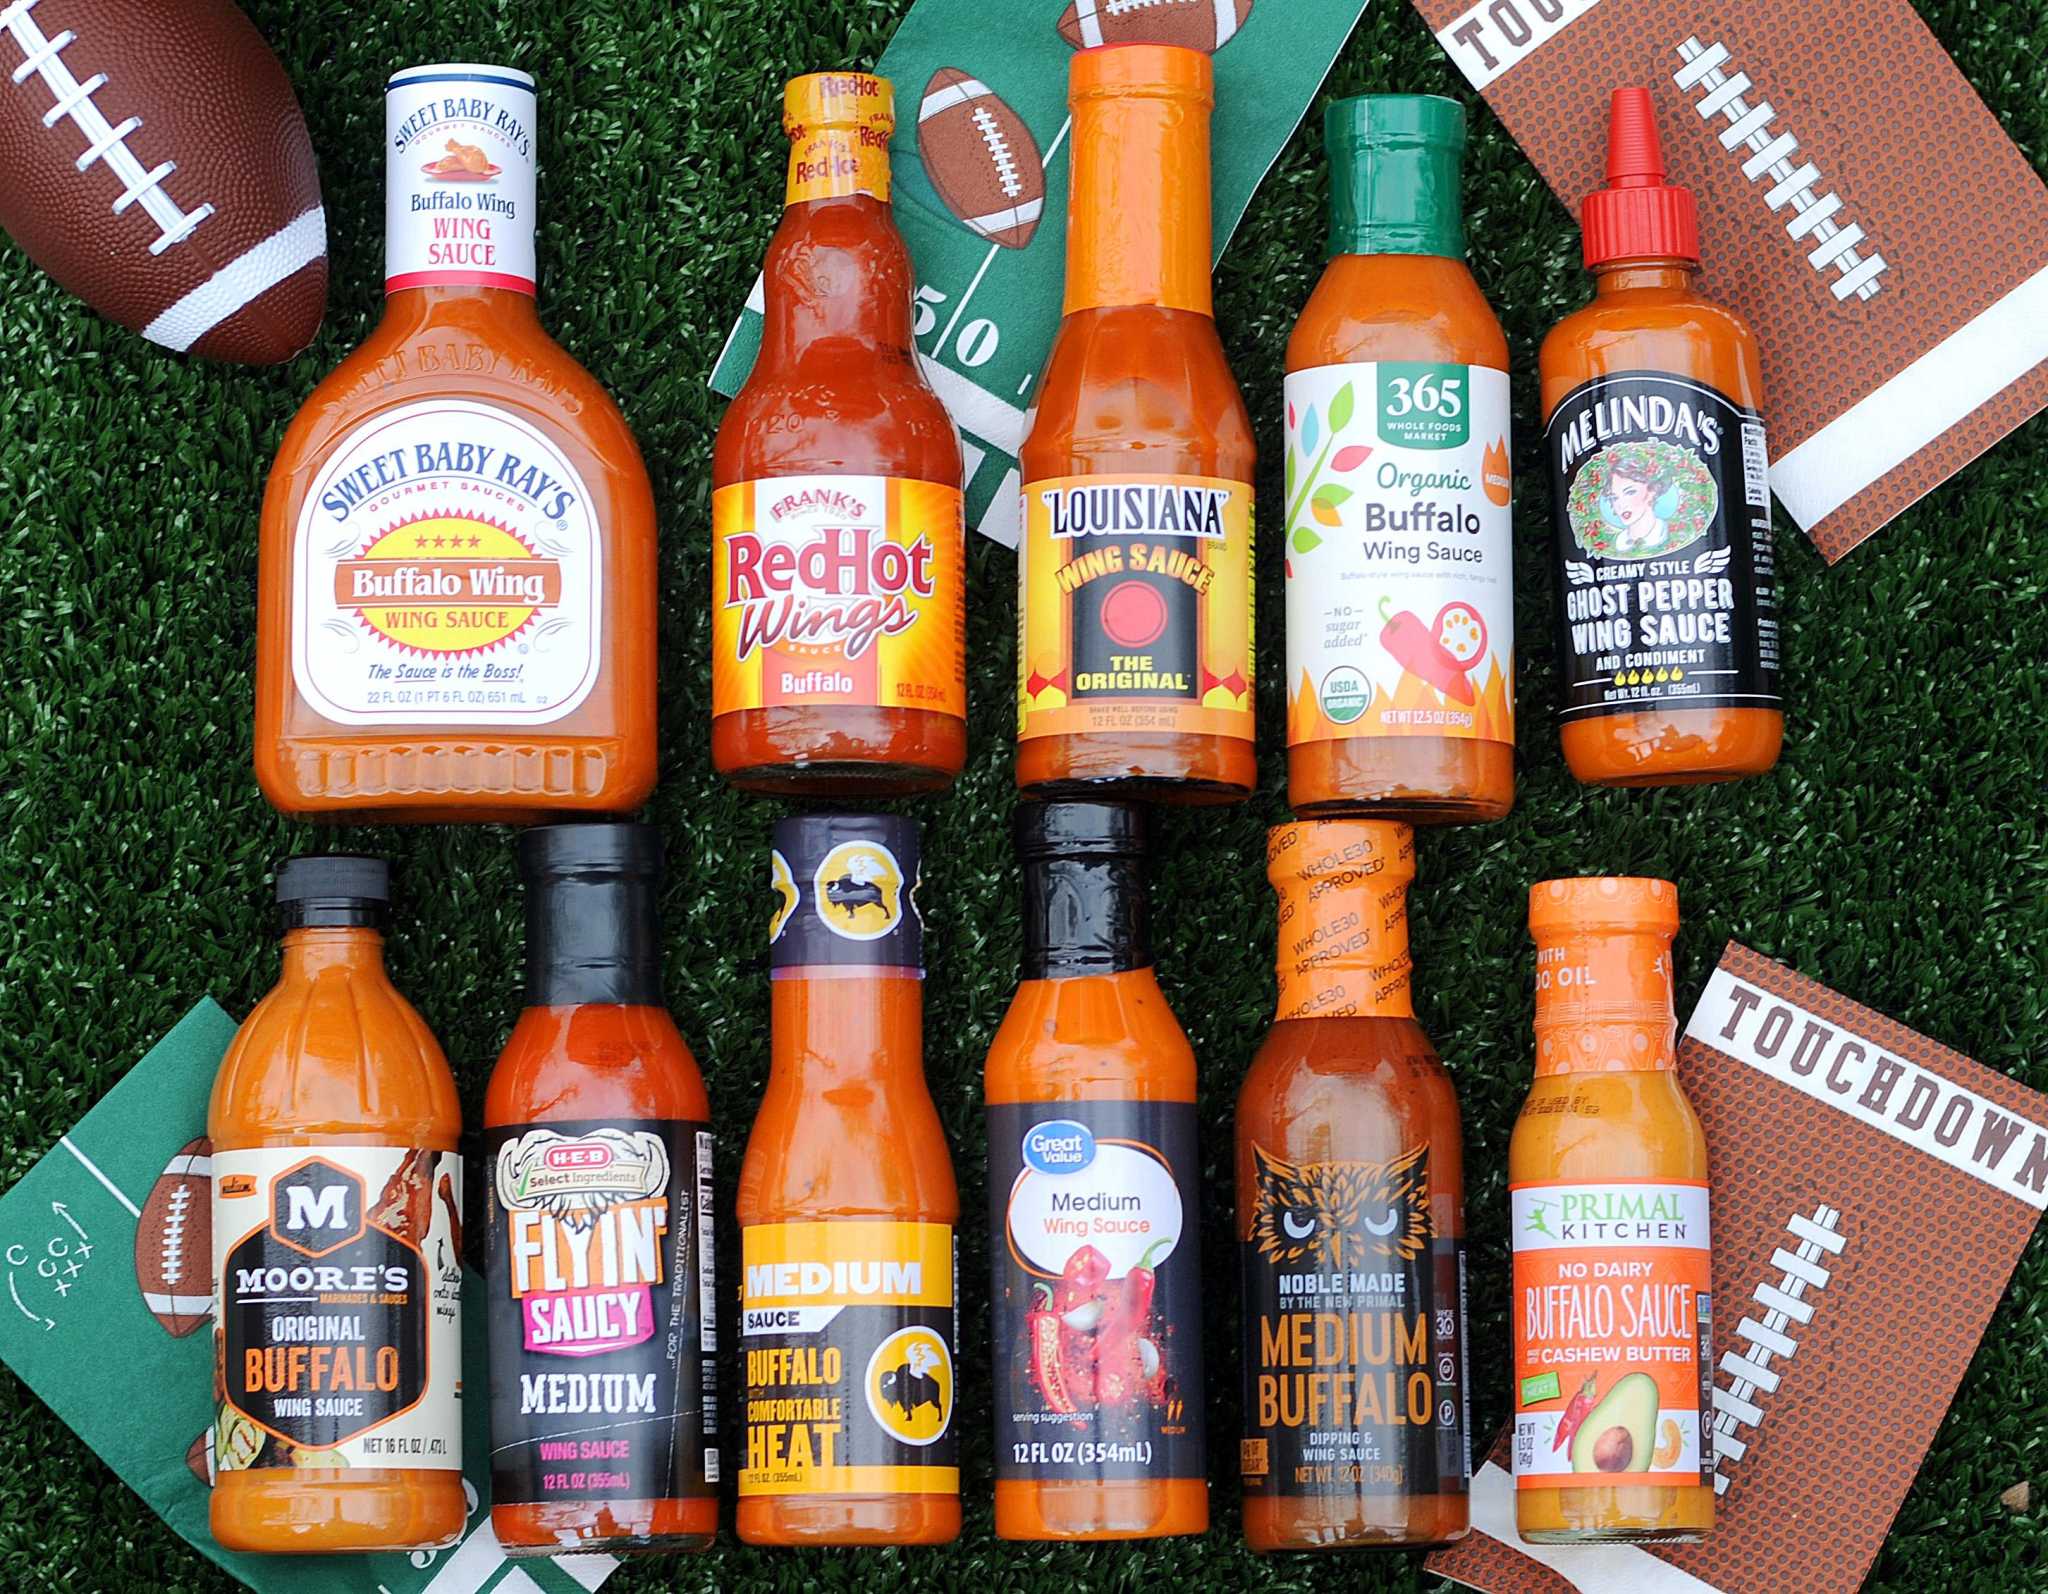 The 6 best bottled Buffalo wing sauces for your Superbowl chicken wings